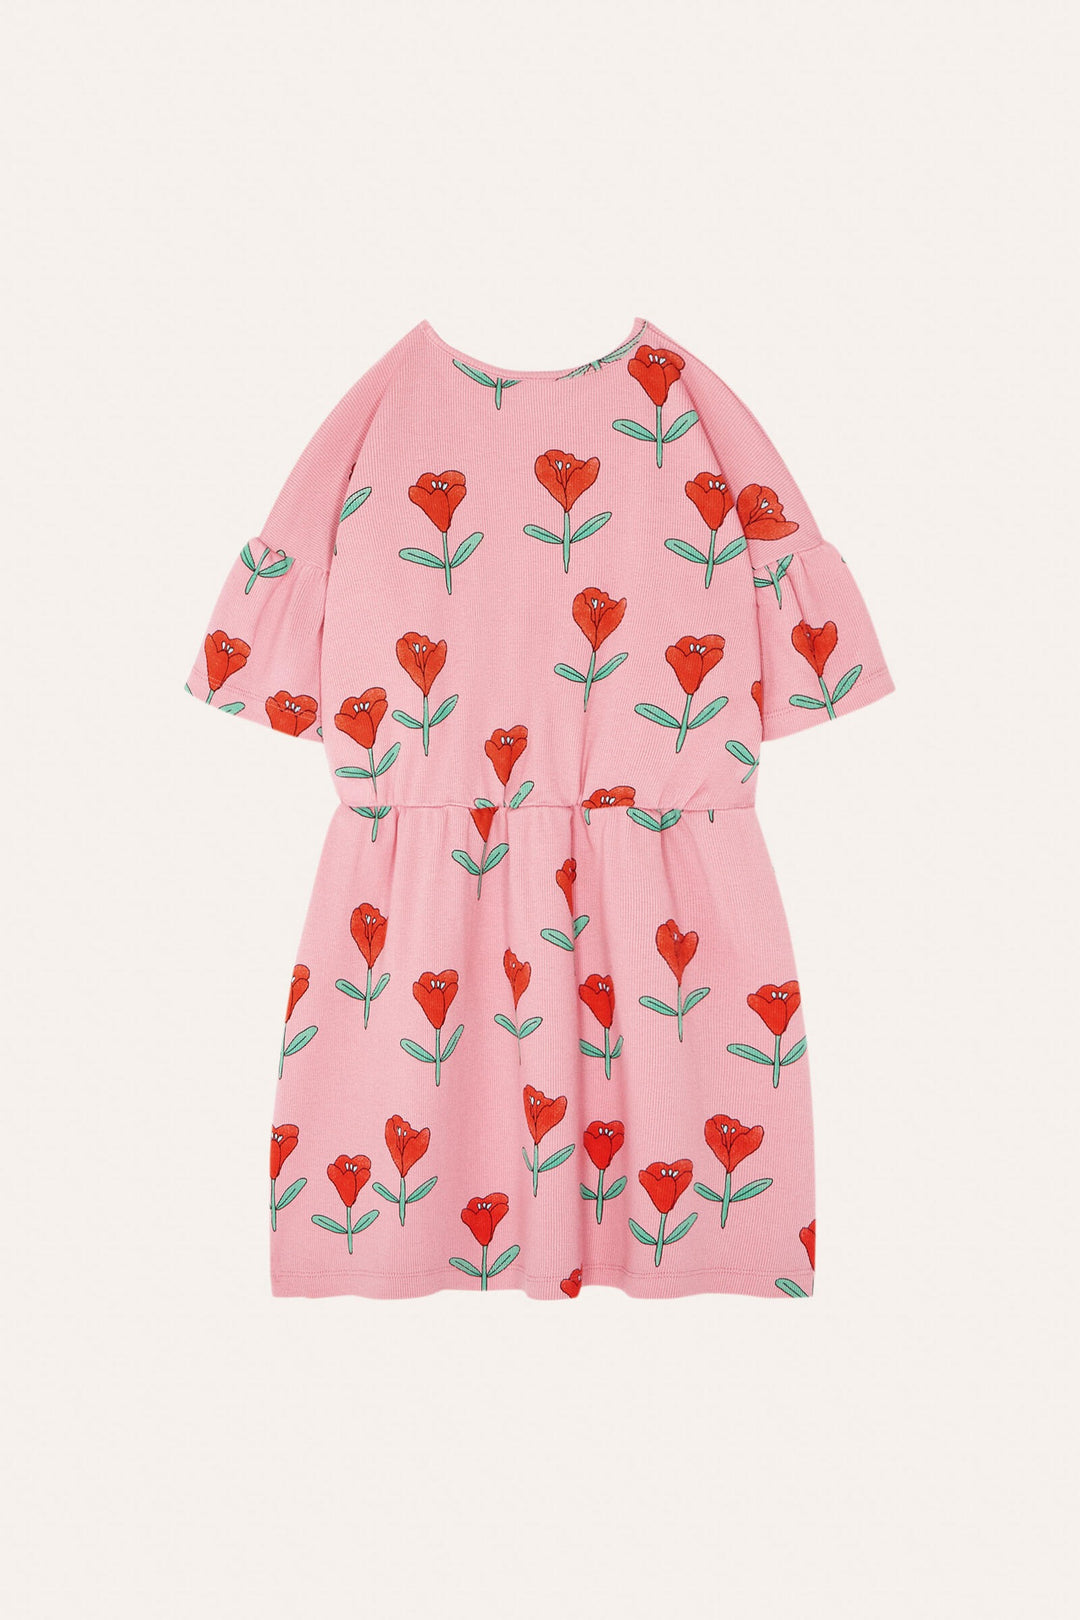 TULIPS ALLOVER PINK DRESS-Pink